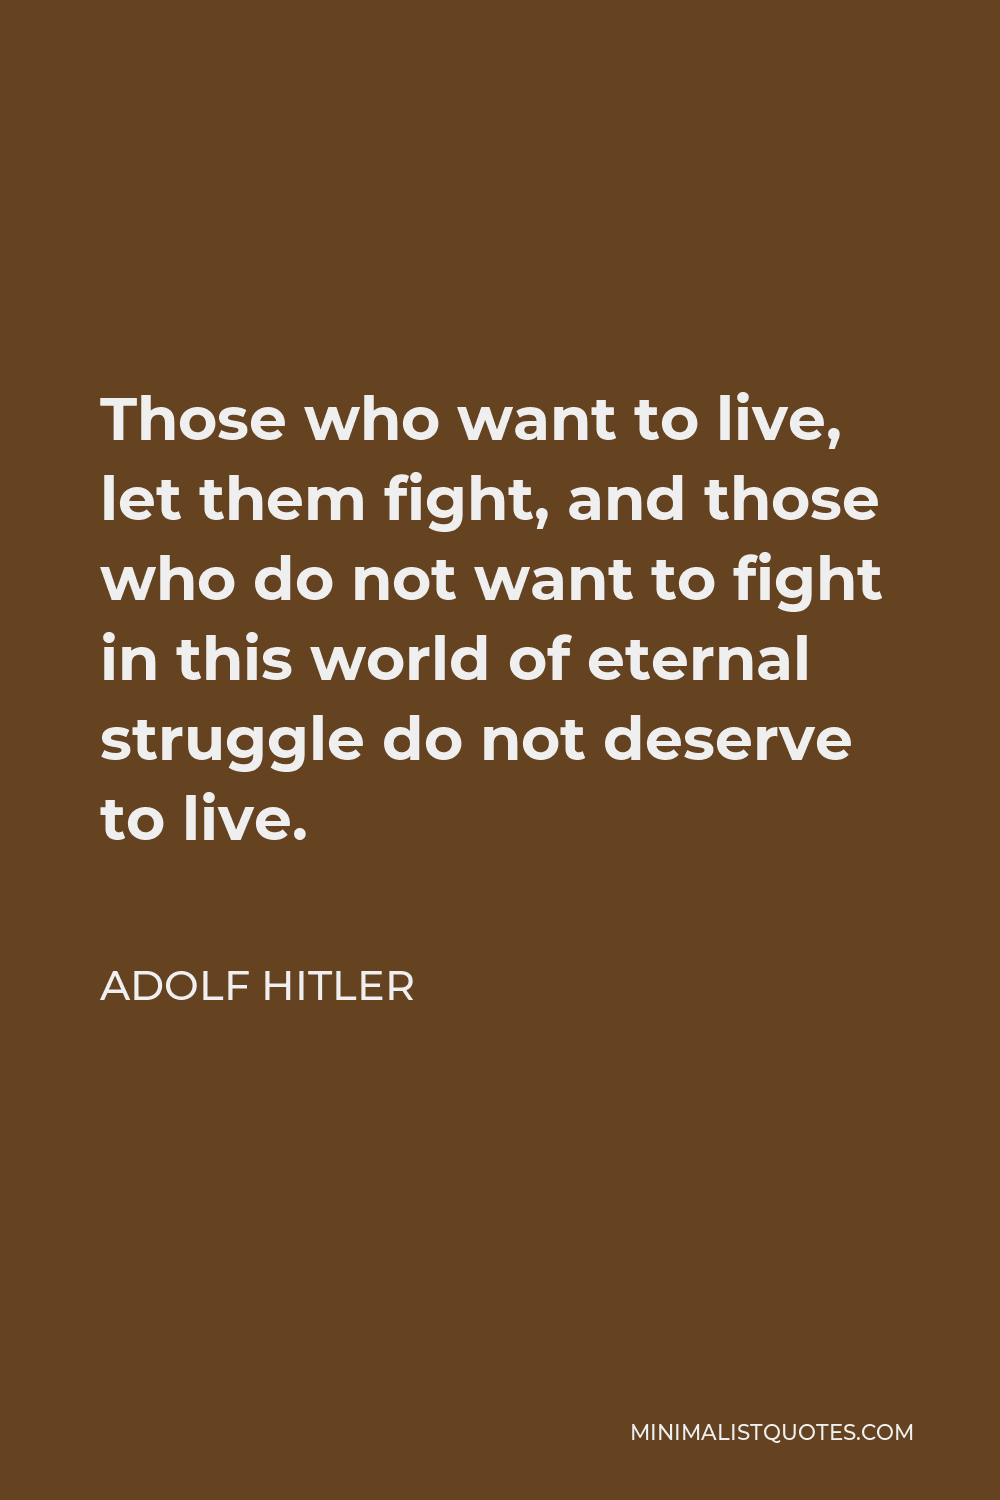 Adolf Hitler Quote - Those who want to live, let them fight, and those who do not want to fight in this world of eternal struggle do not deserve to live.